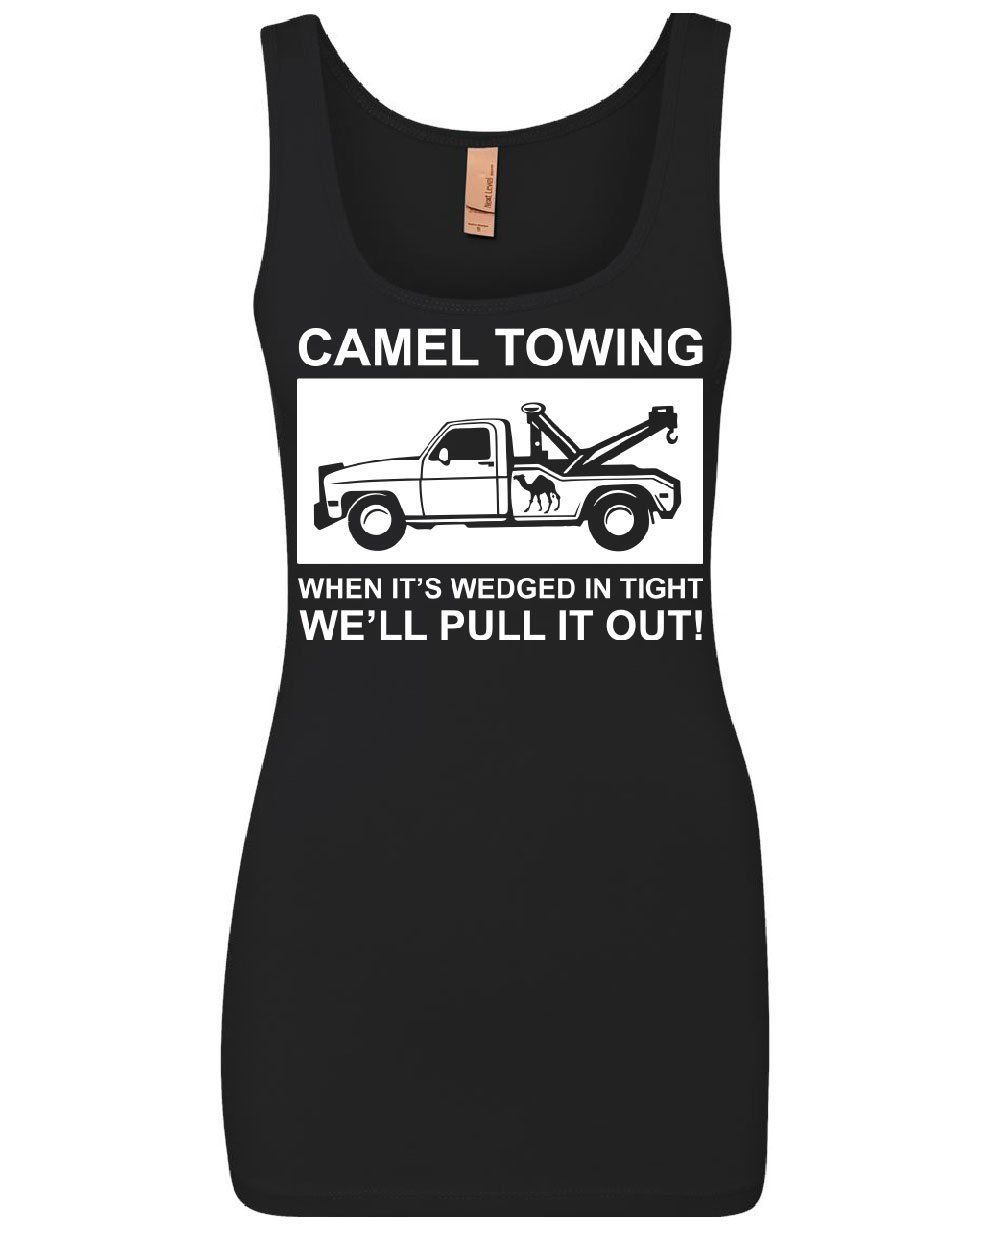 Camel Towing Pull It Out Women S Tank Top Funny Naughty Adult Camel Toe